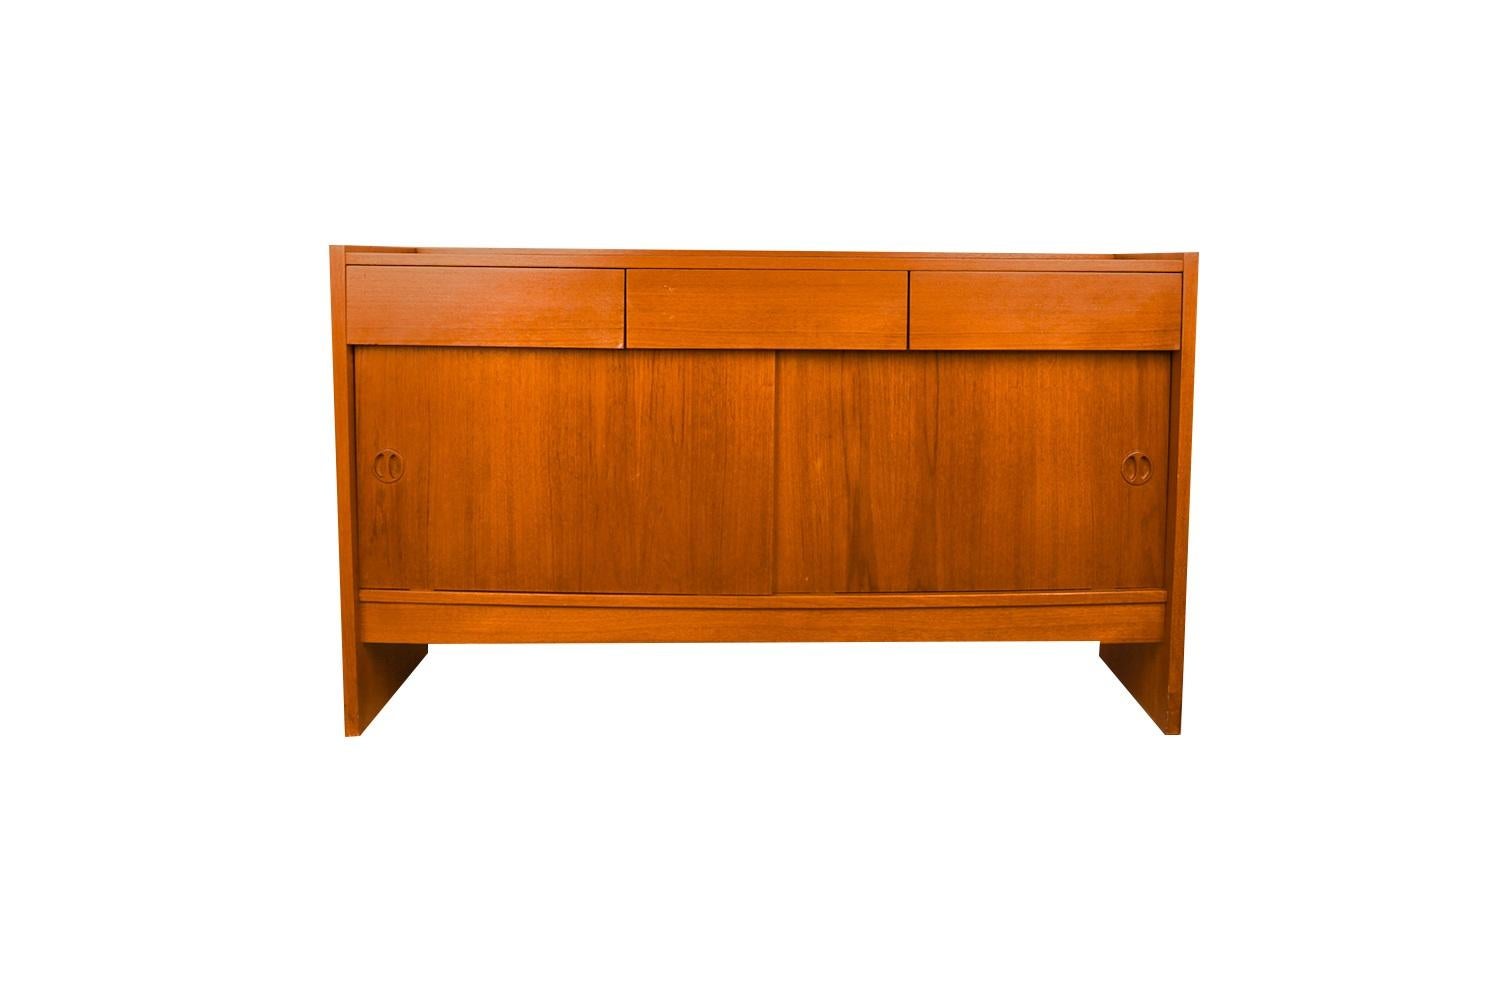 An exceptional teak cabinet/credenza, circa 1970’s, made in Denmark. This absolutely stunning piece features three spacious drawers above a sliding double door cabinet with storage. The cabinet doors are adorned with sculpted pulls, expertly crafted